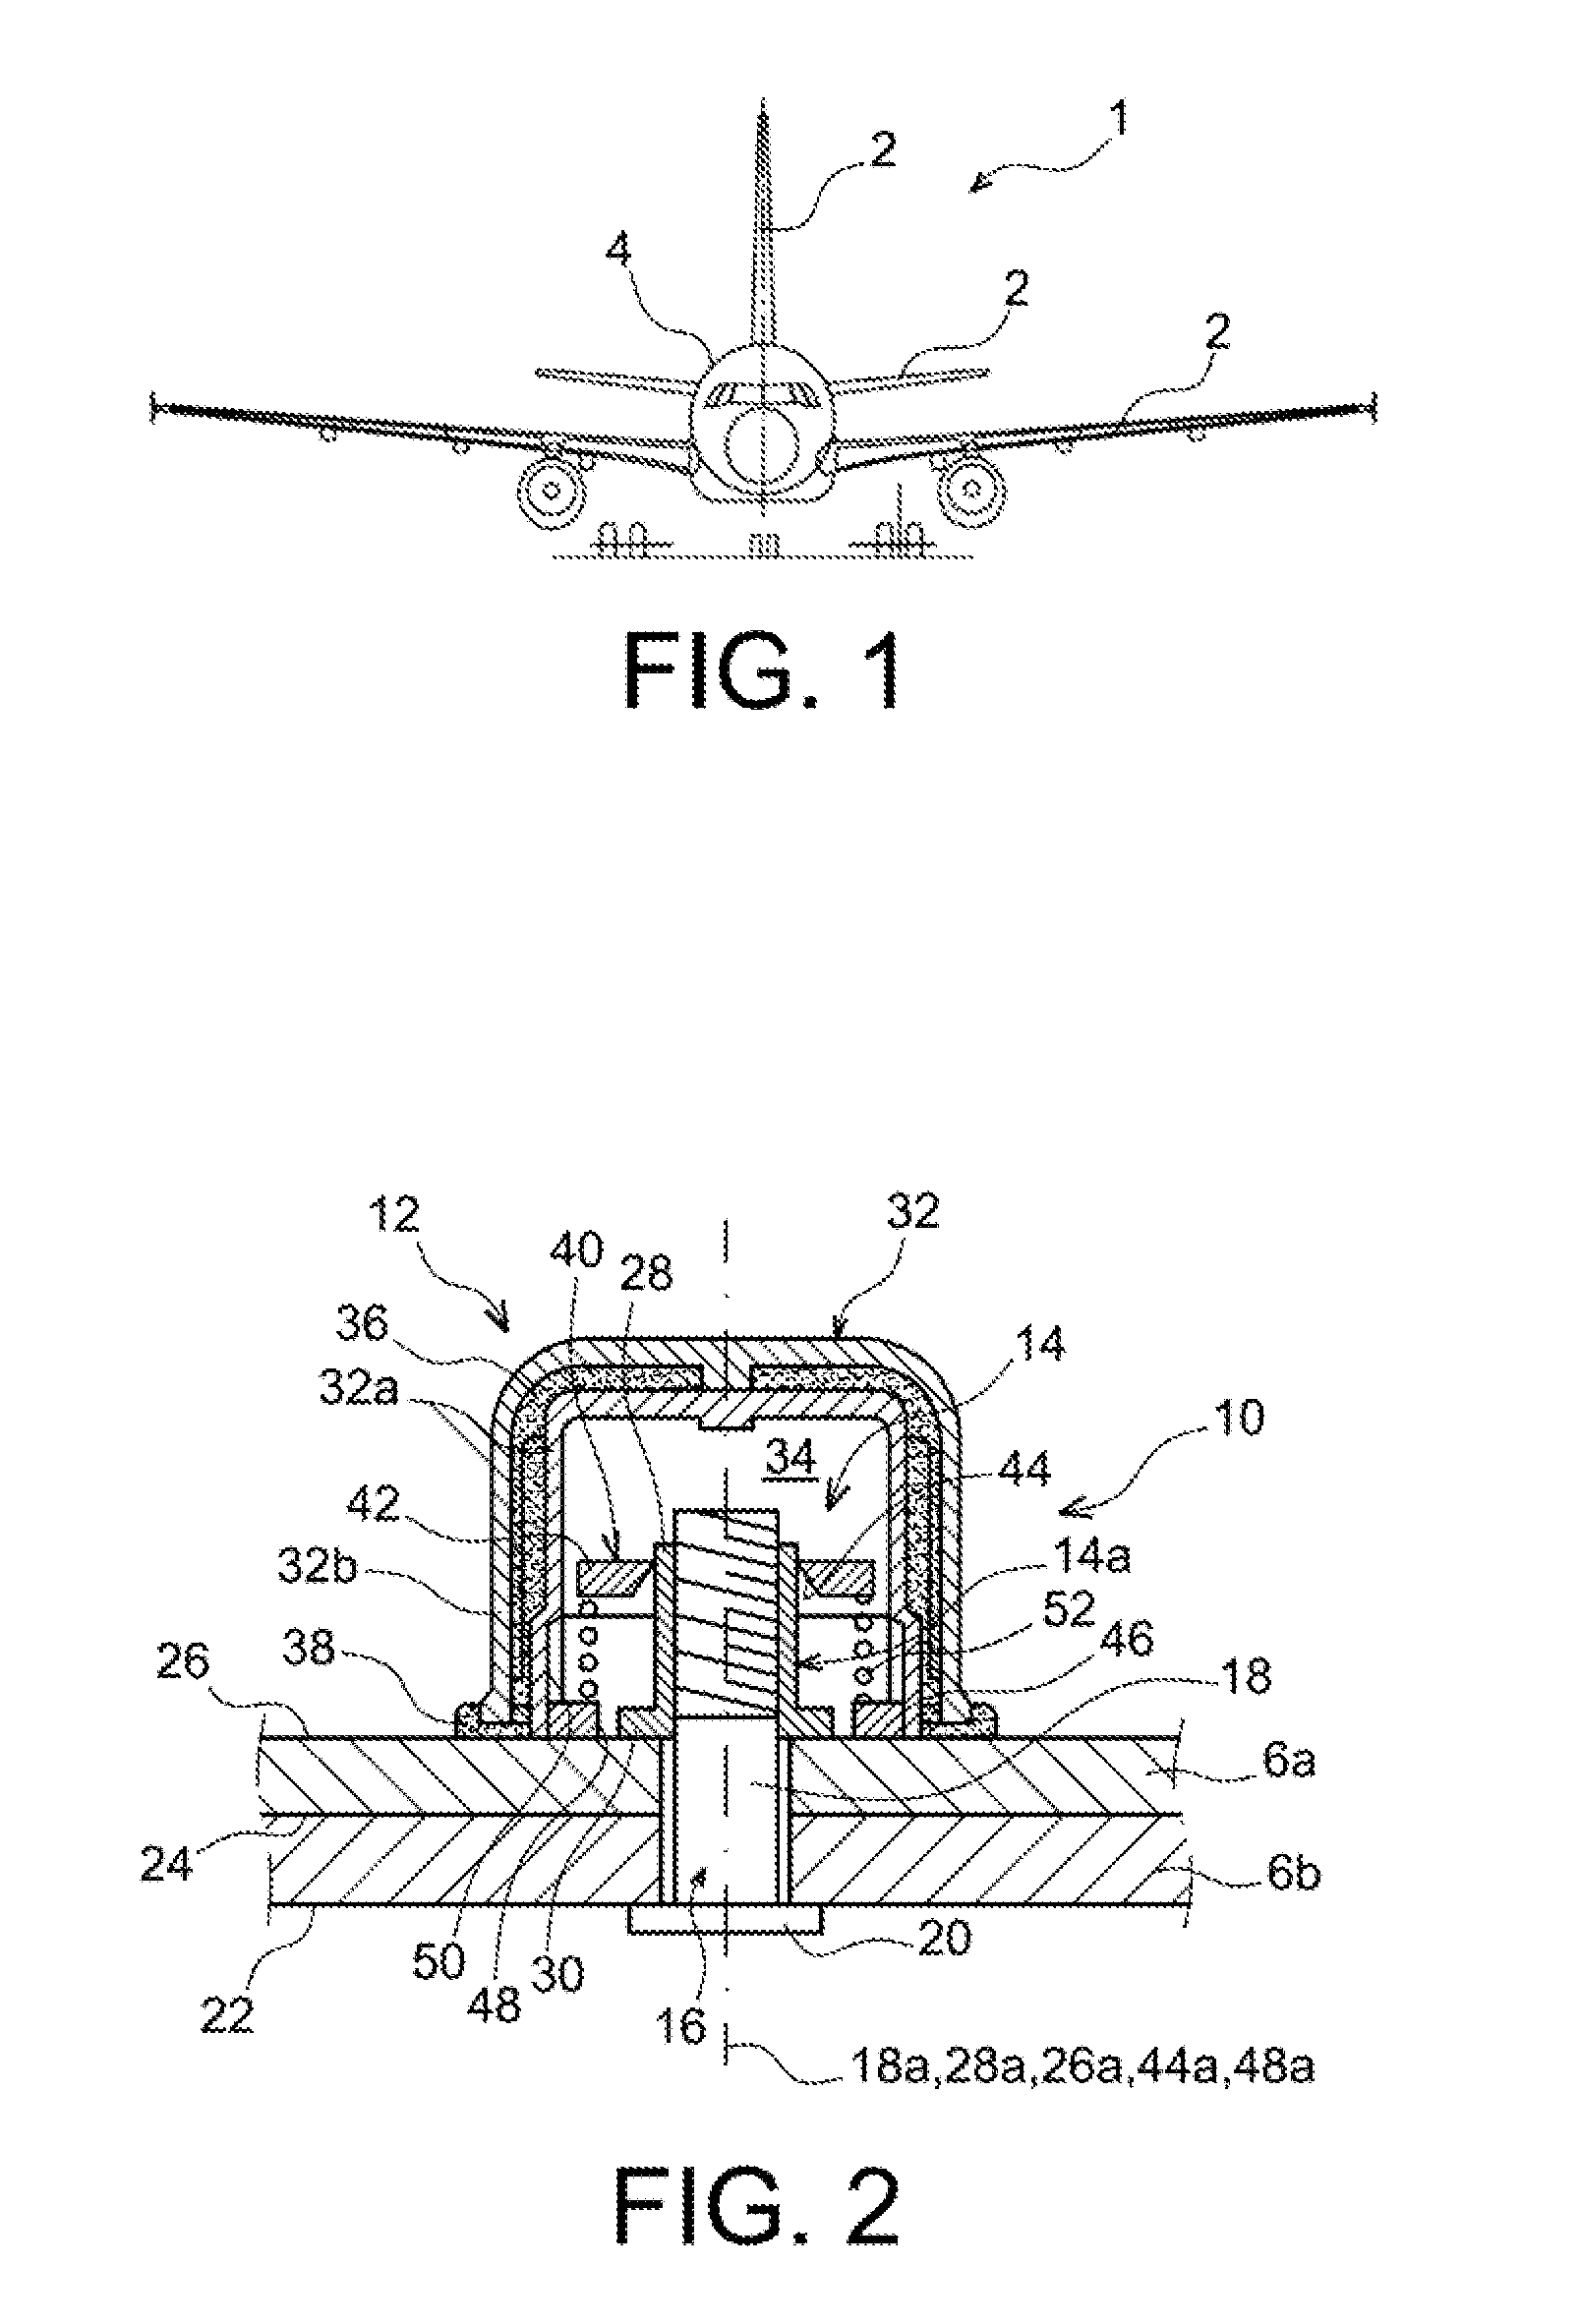 Guiding device which is intended to be interposed between a device for fixing components of an assembly, and a device for protecting the fixing device